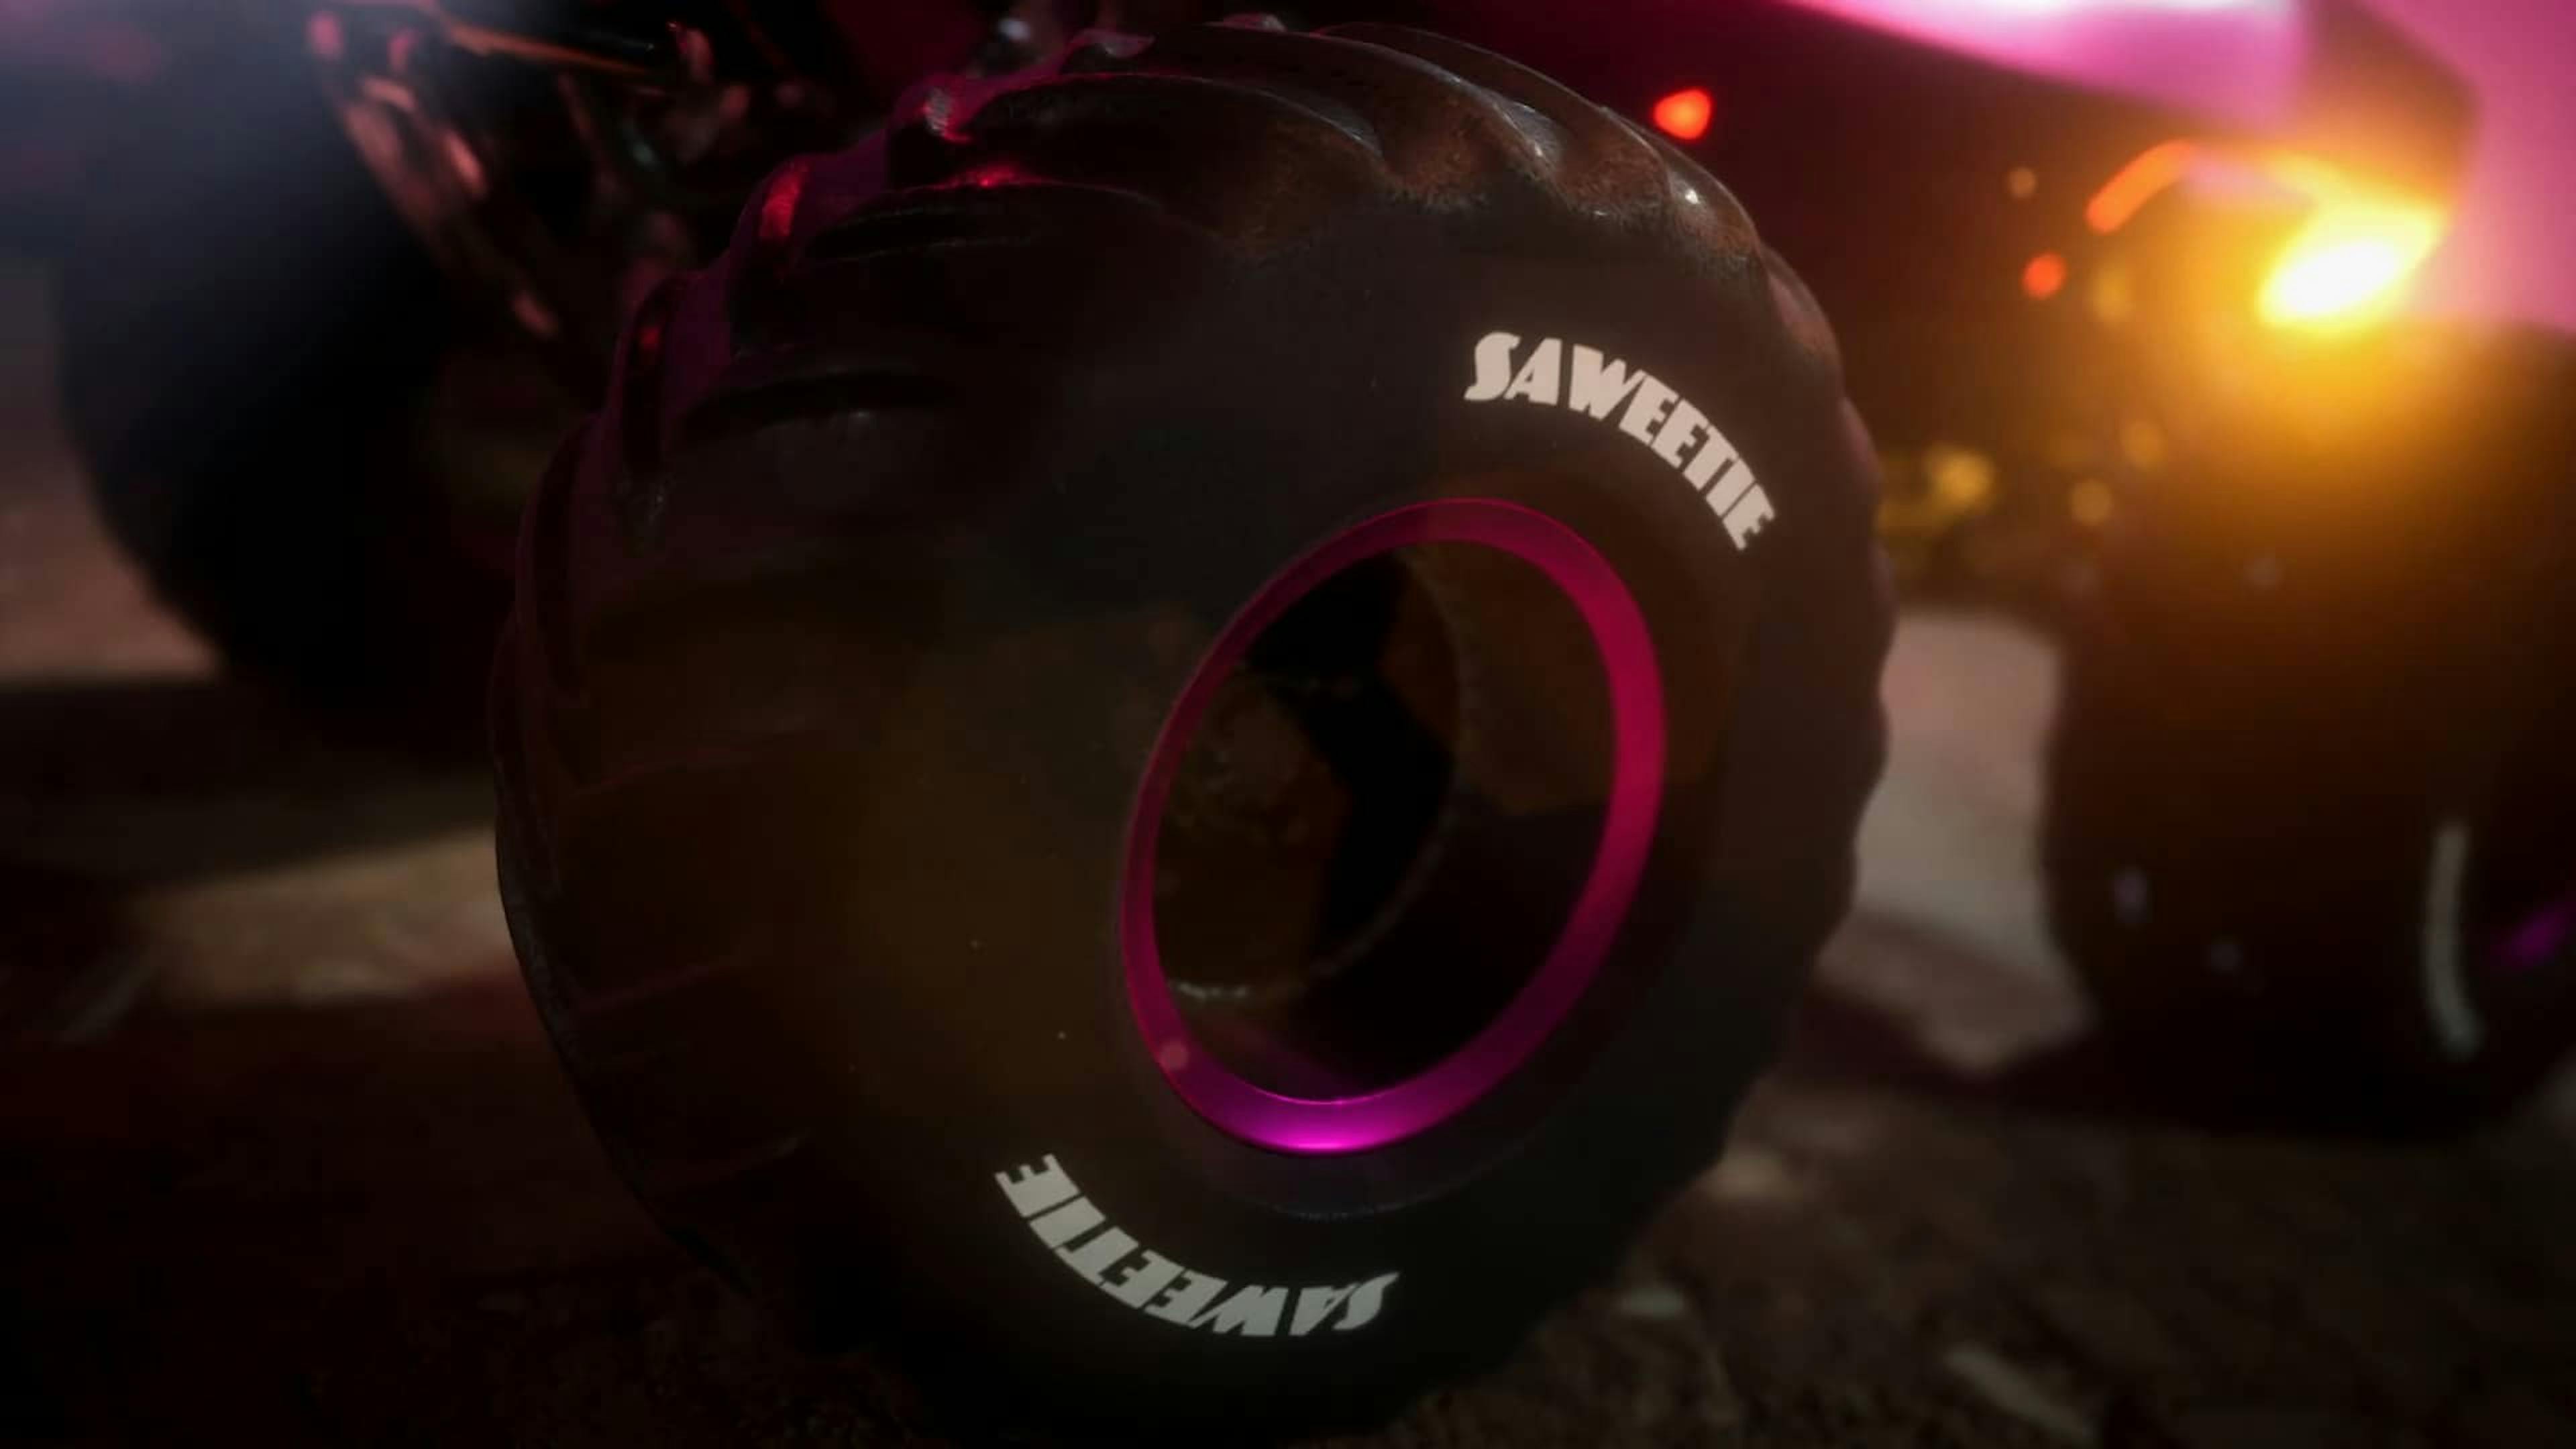 A dramatic close-up of a large, black off-road tire with the name 'SAWEETIE' printed in bold white letters on its side. The inner rim of the tire features a vivid pink glow, giving the image a dynamic and edgy feel. The background is dimly lit, with a hint of the vehicle's body and ambient lights that suggest a powerful, rugged aesthetic associated with high-energy action.